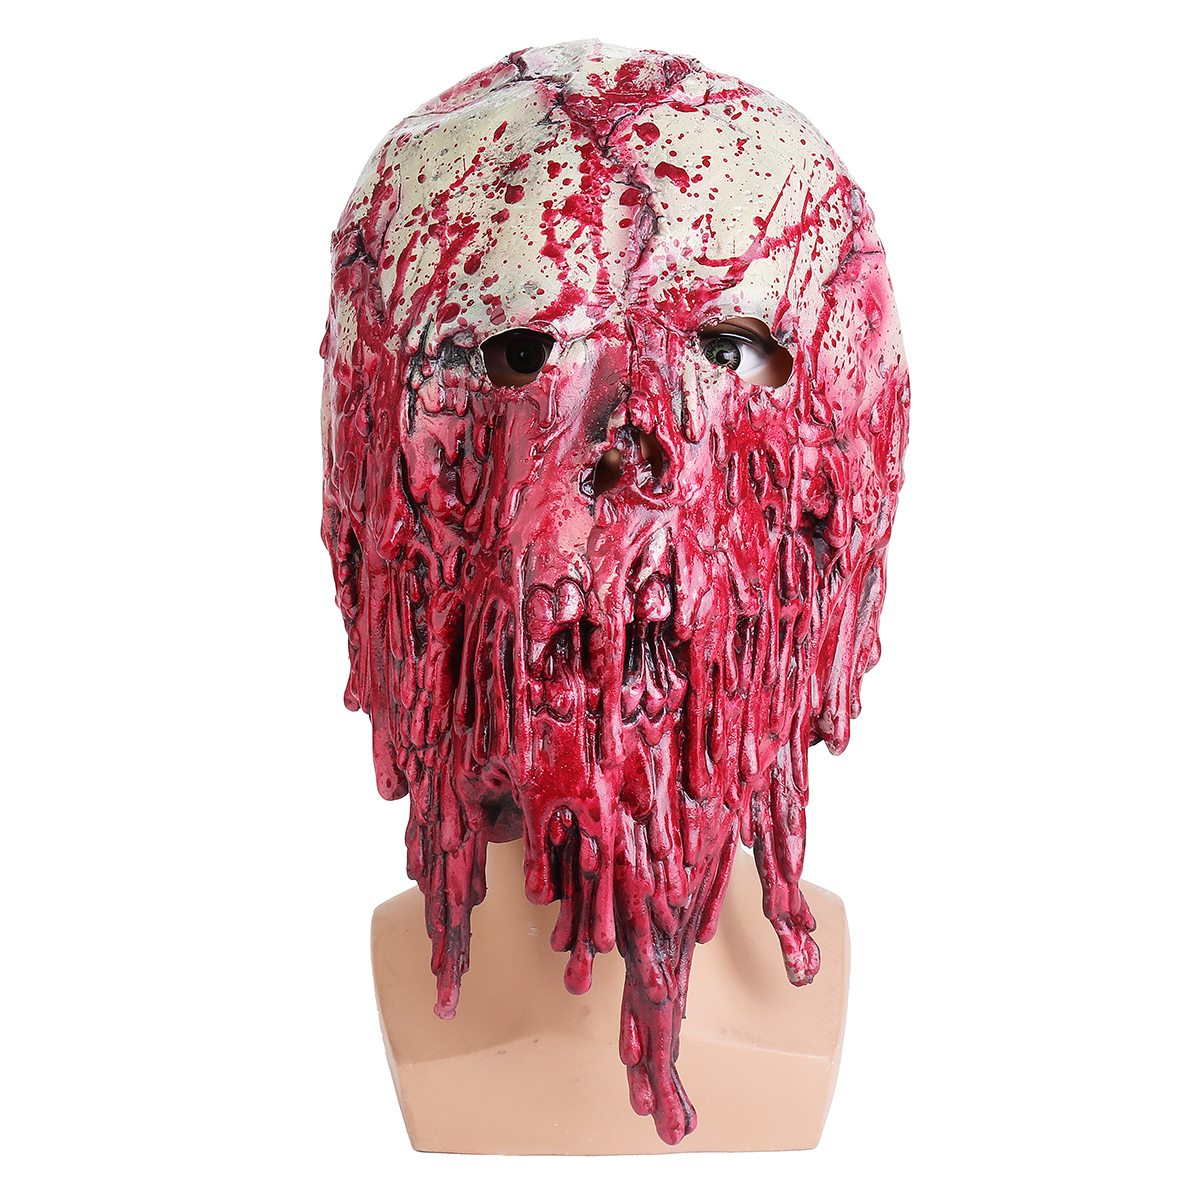 Halloween-Mask-Bloody-Festival-Skull-Zombie-Latex-Cosplay-Horror-Costume-Props-Mask-1419861-3